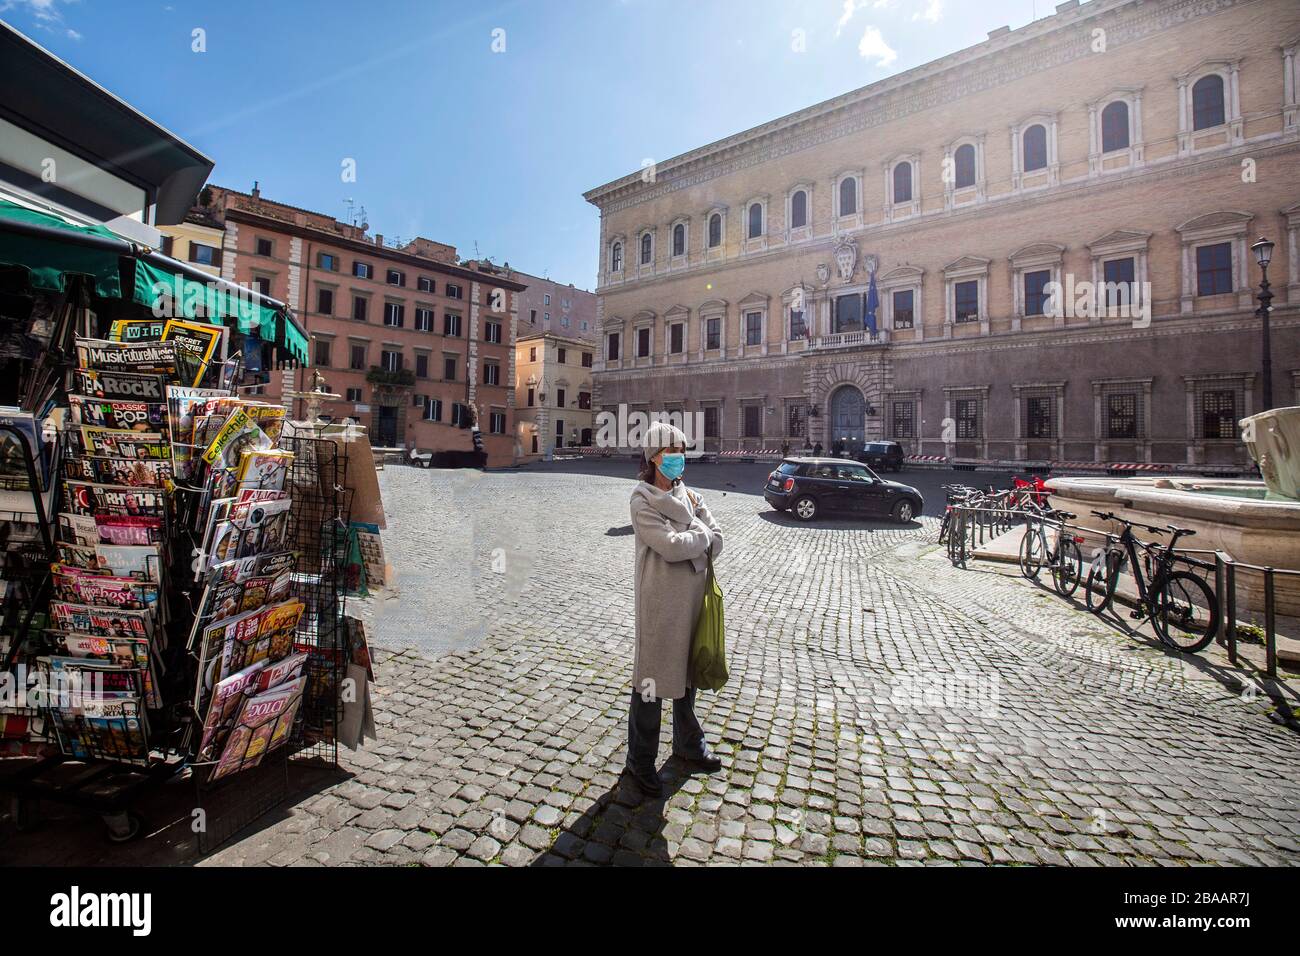 Rome March 25th 2020 Rome during the Coronavirus pandemic. people wear mask in Piazza Farnese  Photo by Elio Castoria Stock Photo